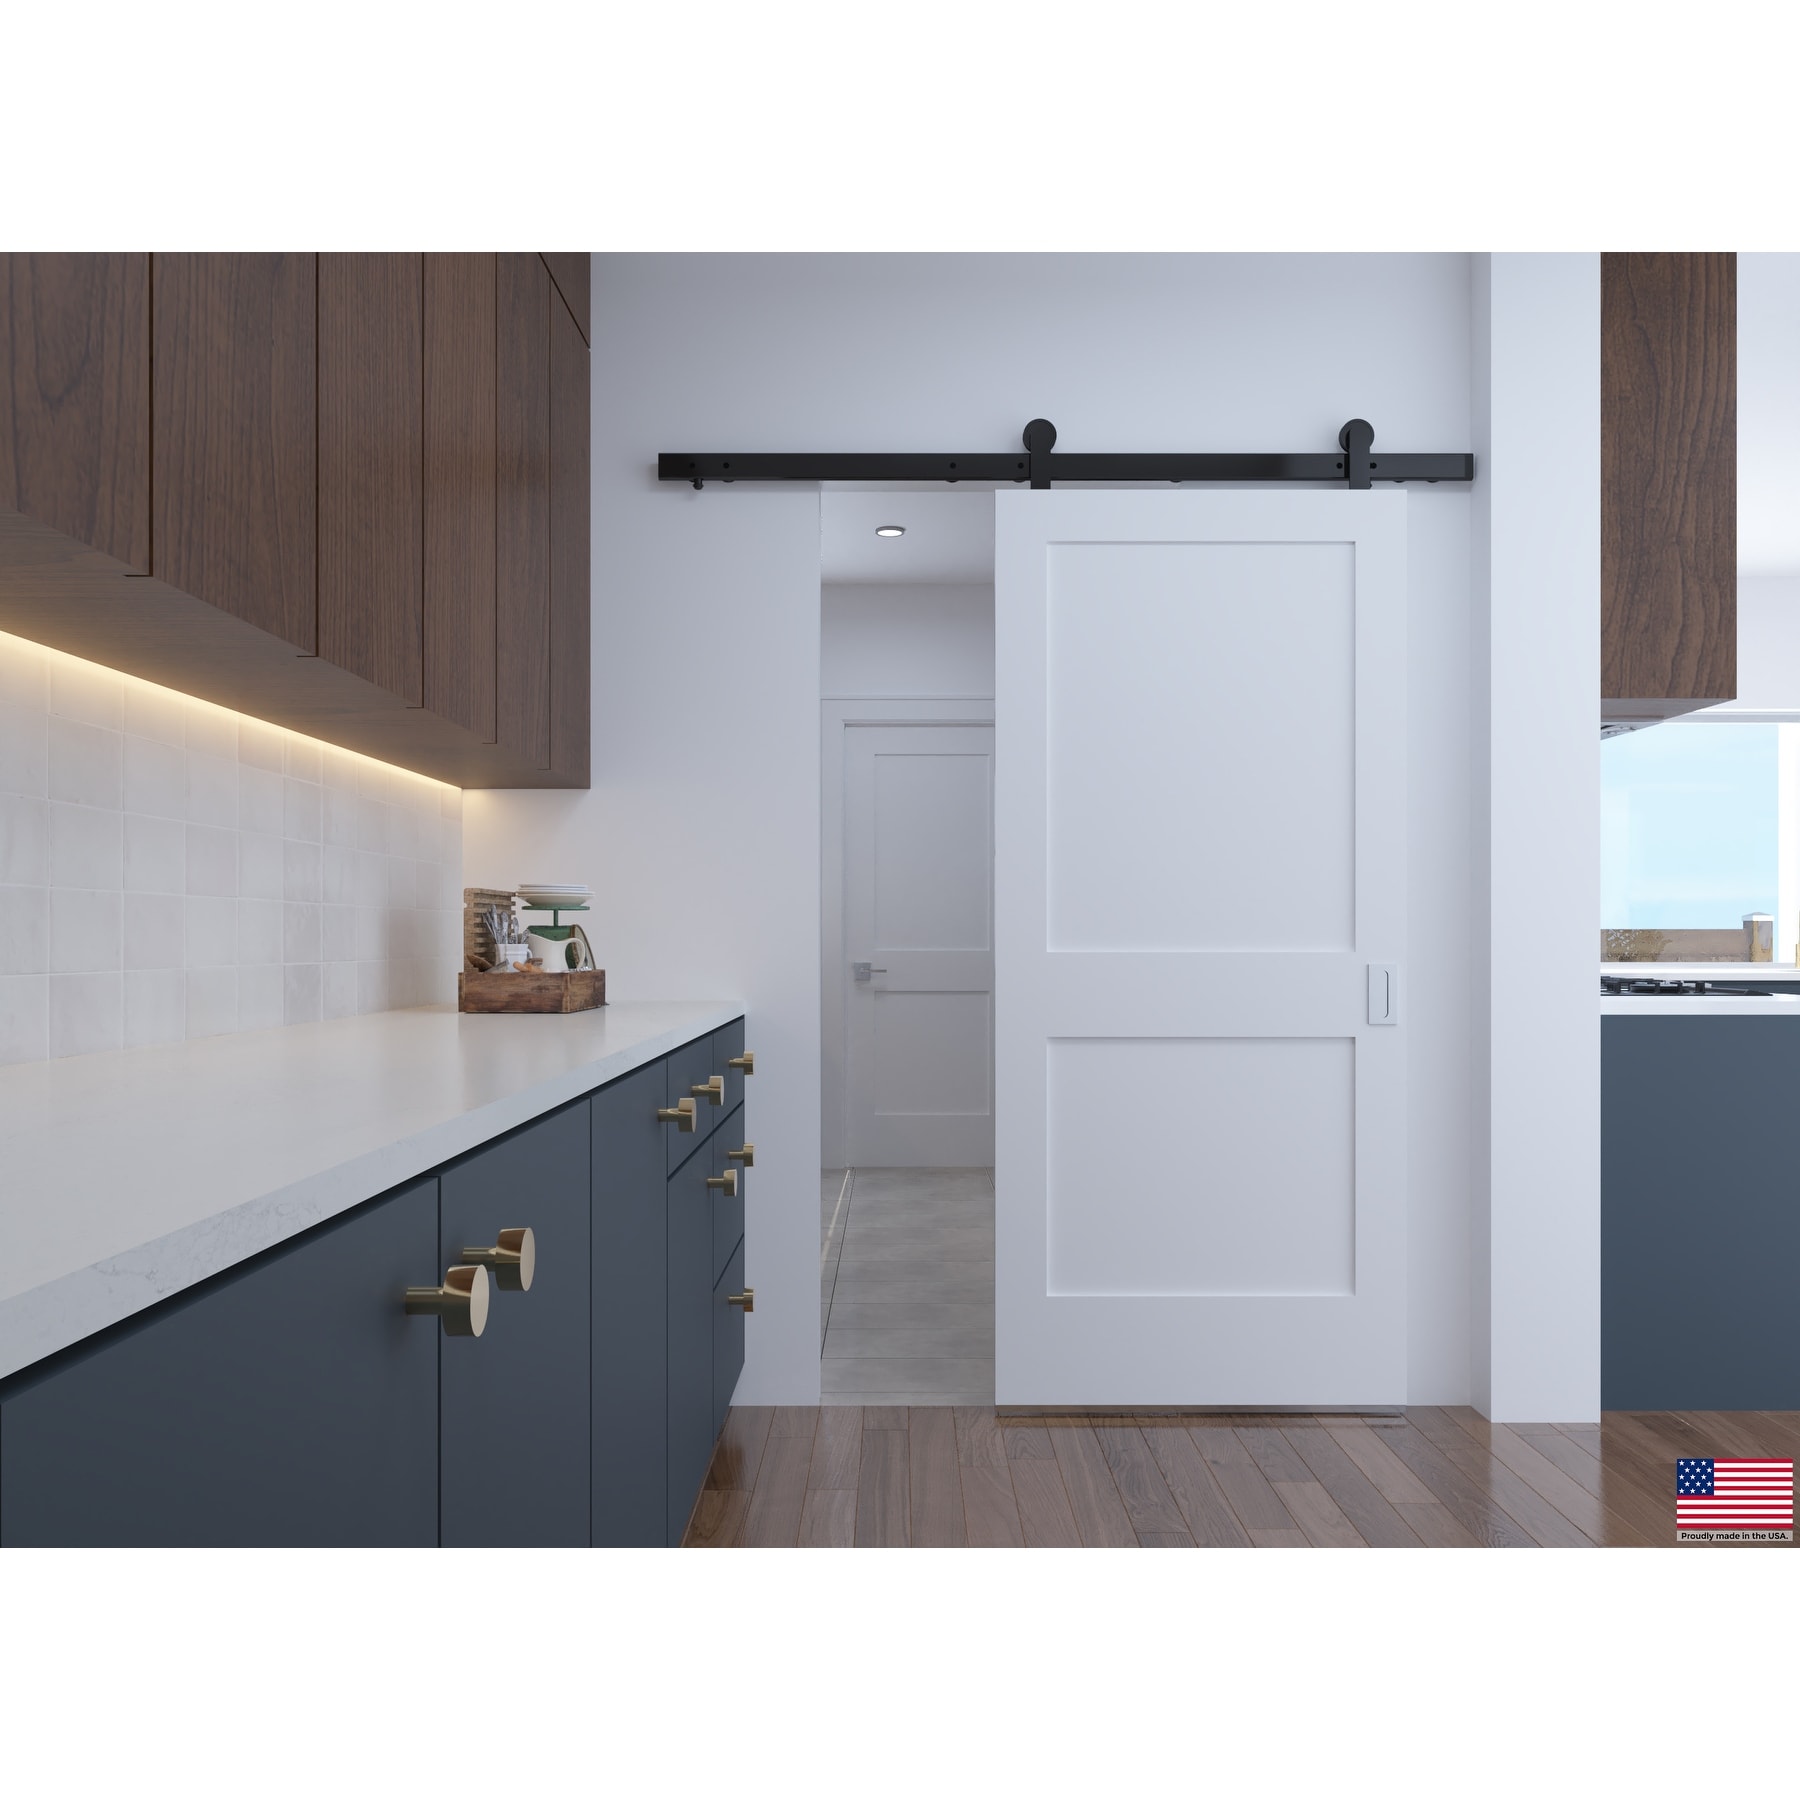 https://ak1.ostkcdn.com/images/products/is/images/direct/8e349194ddd06af3dcd6072cfe30fd33c62c0e61/RESO-Solid-Core-Double-Panel-Style-Interior-Door-White-%28Slab-Only%29.jpg